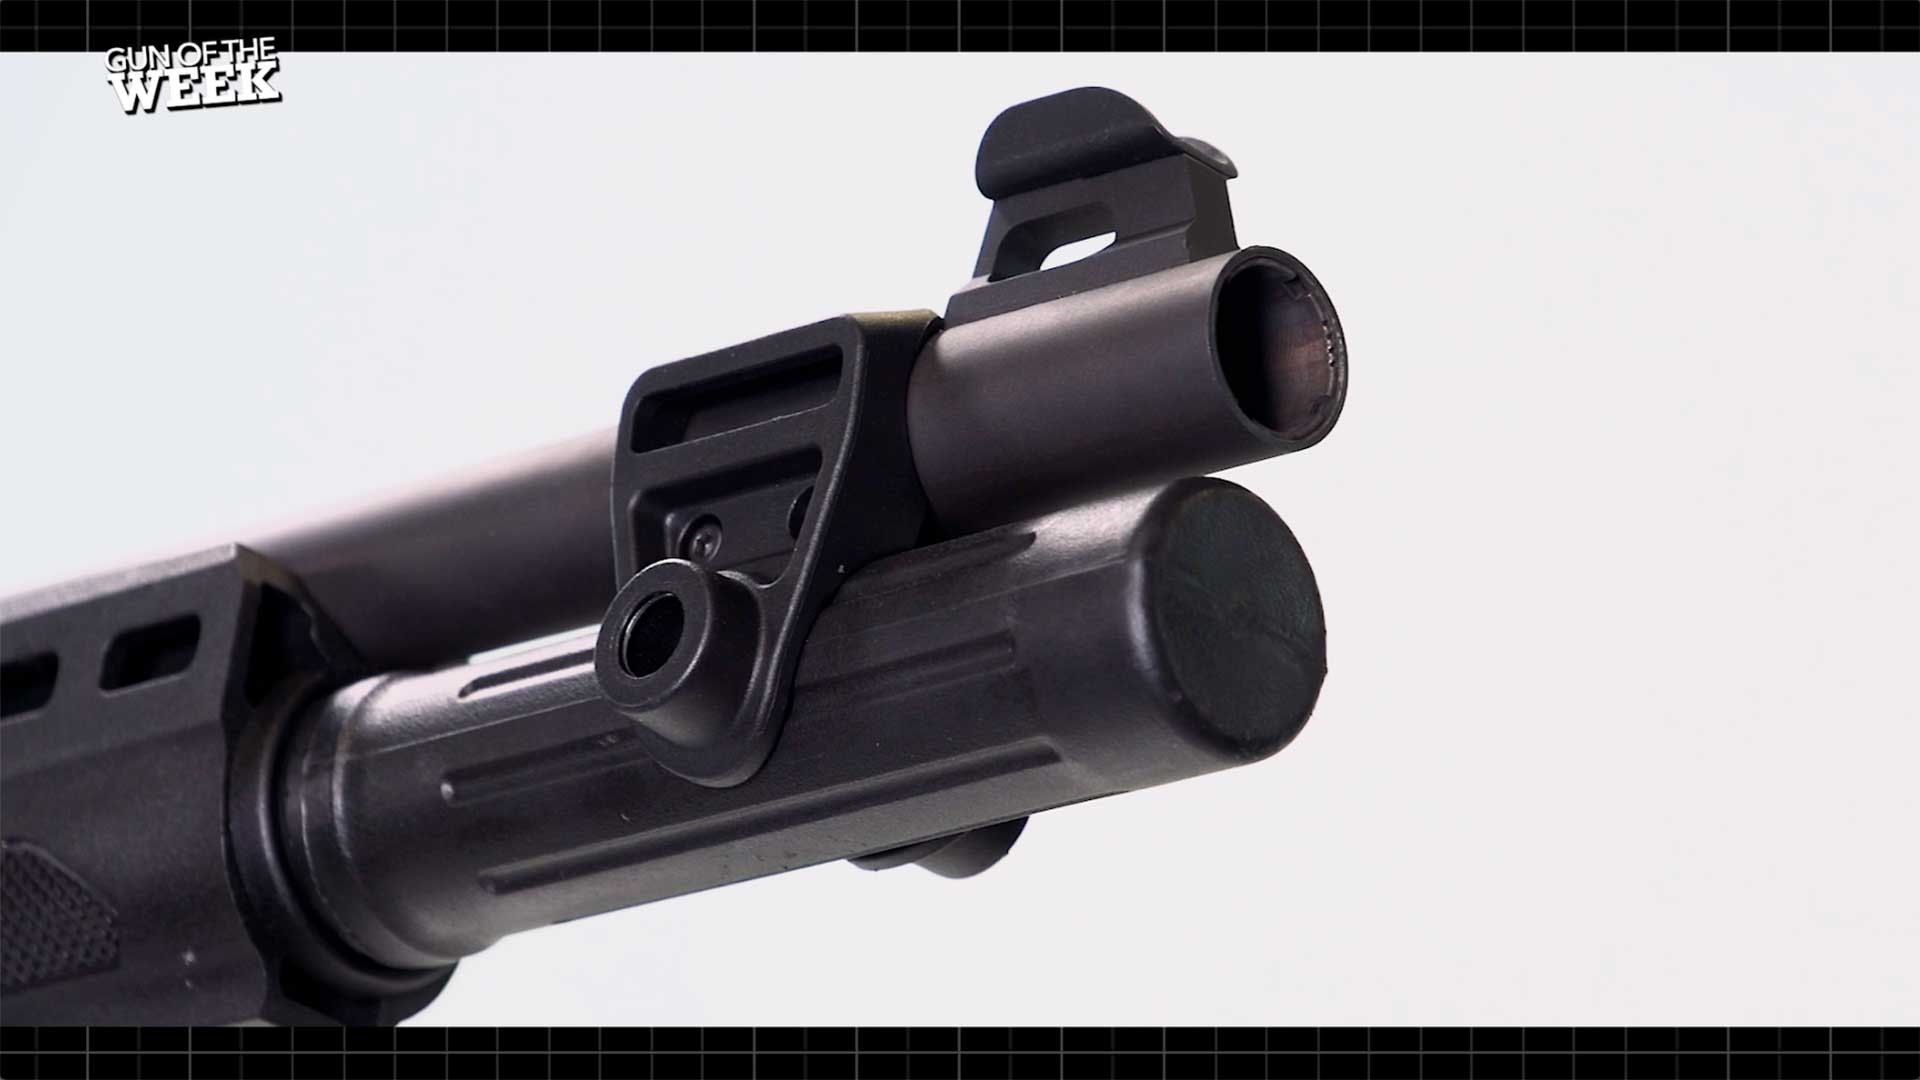 Muzzle end of the Beretta A300 Ultima Patrol, showing the extended magazine tube, threaded barrel and protected wing front sight.